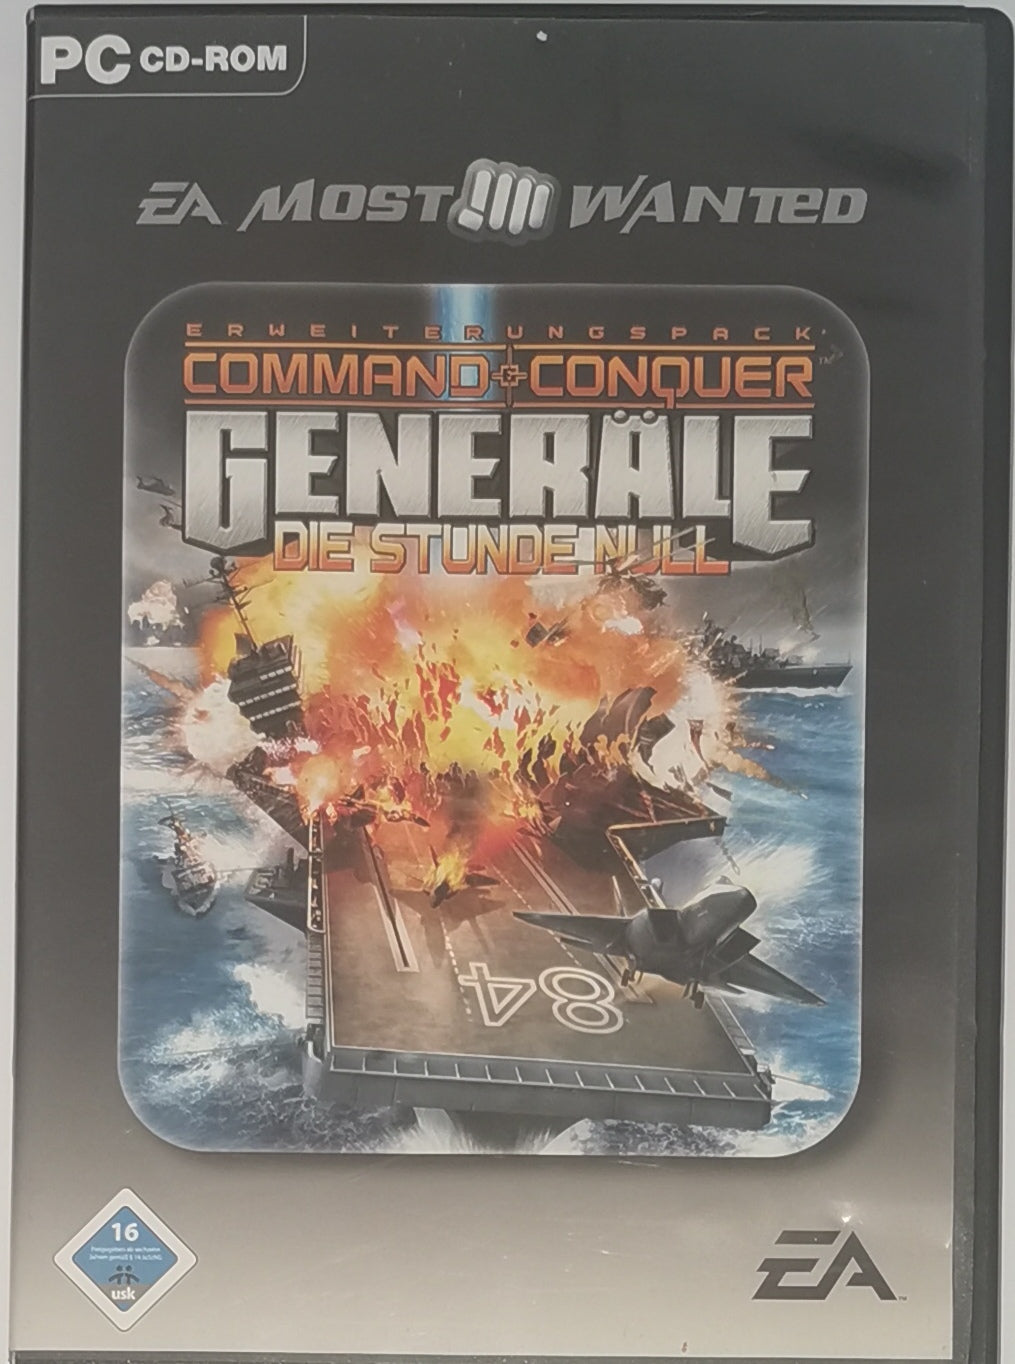 Command amp Conquer Generaele Die Stunde Null EA Most Wanted PC (Windows) [Sehr Gut]